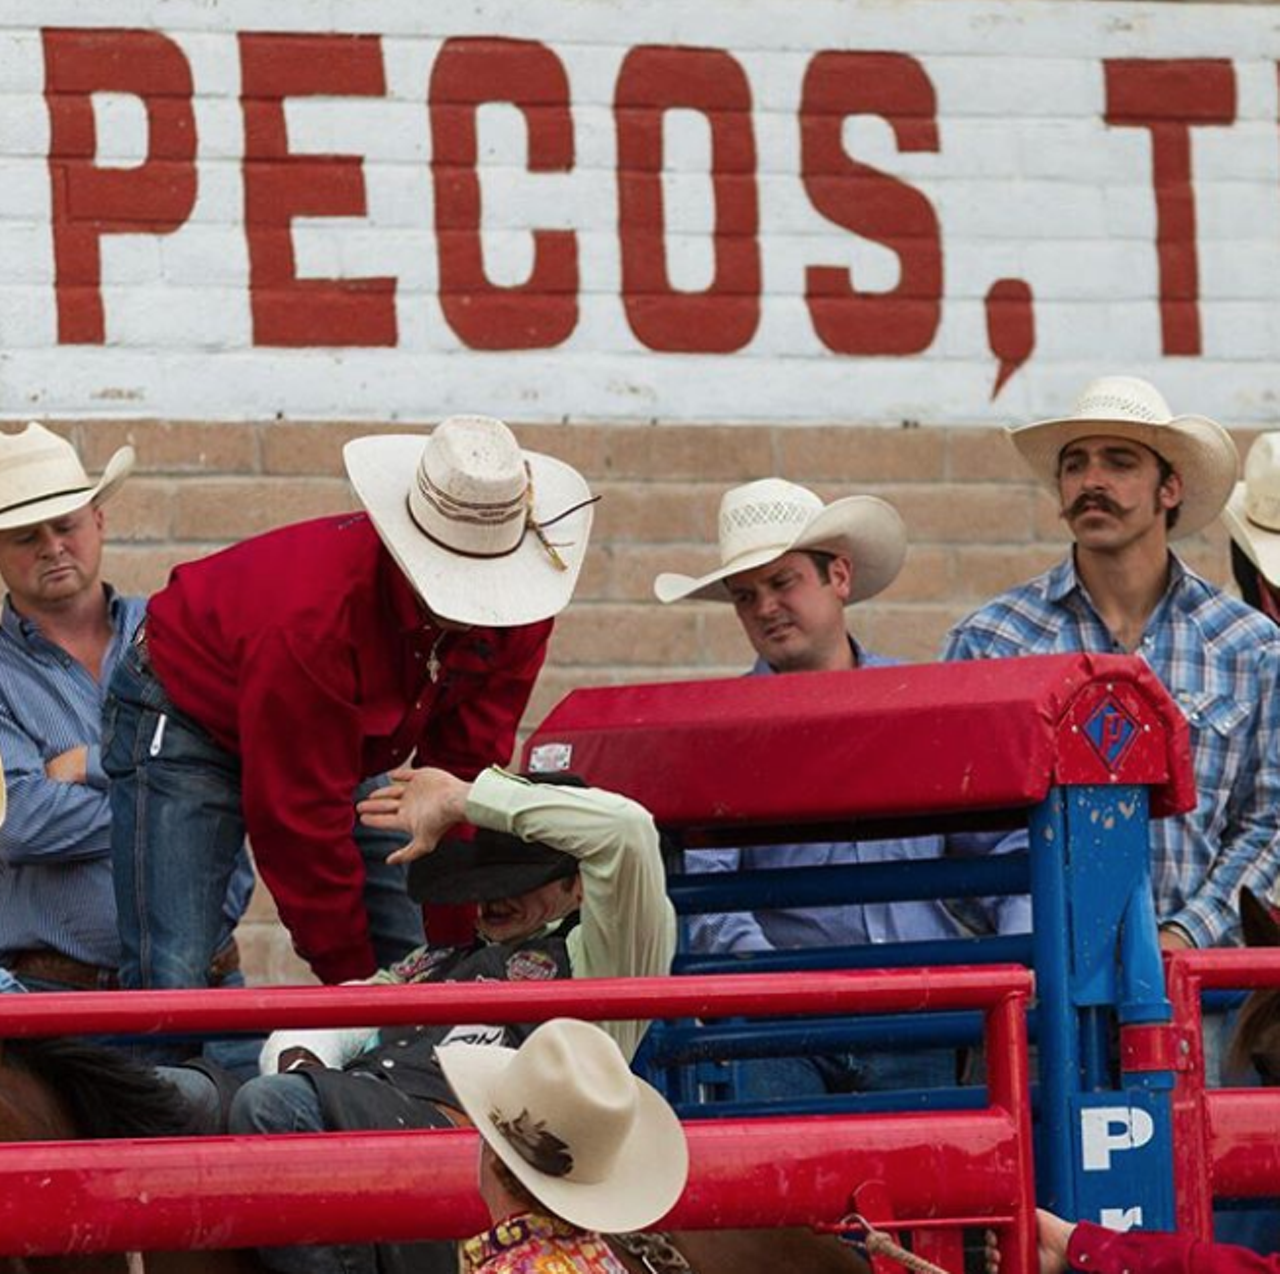 Rodeos have always been a thing in Texas.
Houston is home to the world’s biggest rodeo today, but it isn’t the only Texas town to have claim to fame in the rodeo arena. The world’s first-ever rodeo was held in the small town of Pecos on July 4, 1883.
Photo via Instagram / westofthepecosrodeo